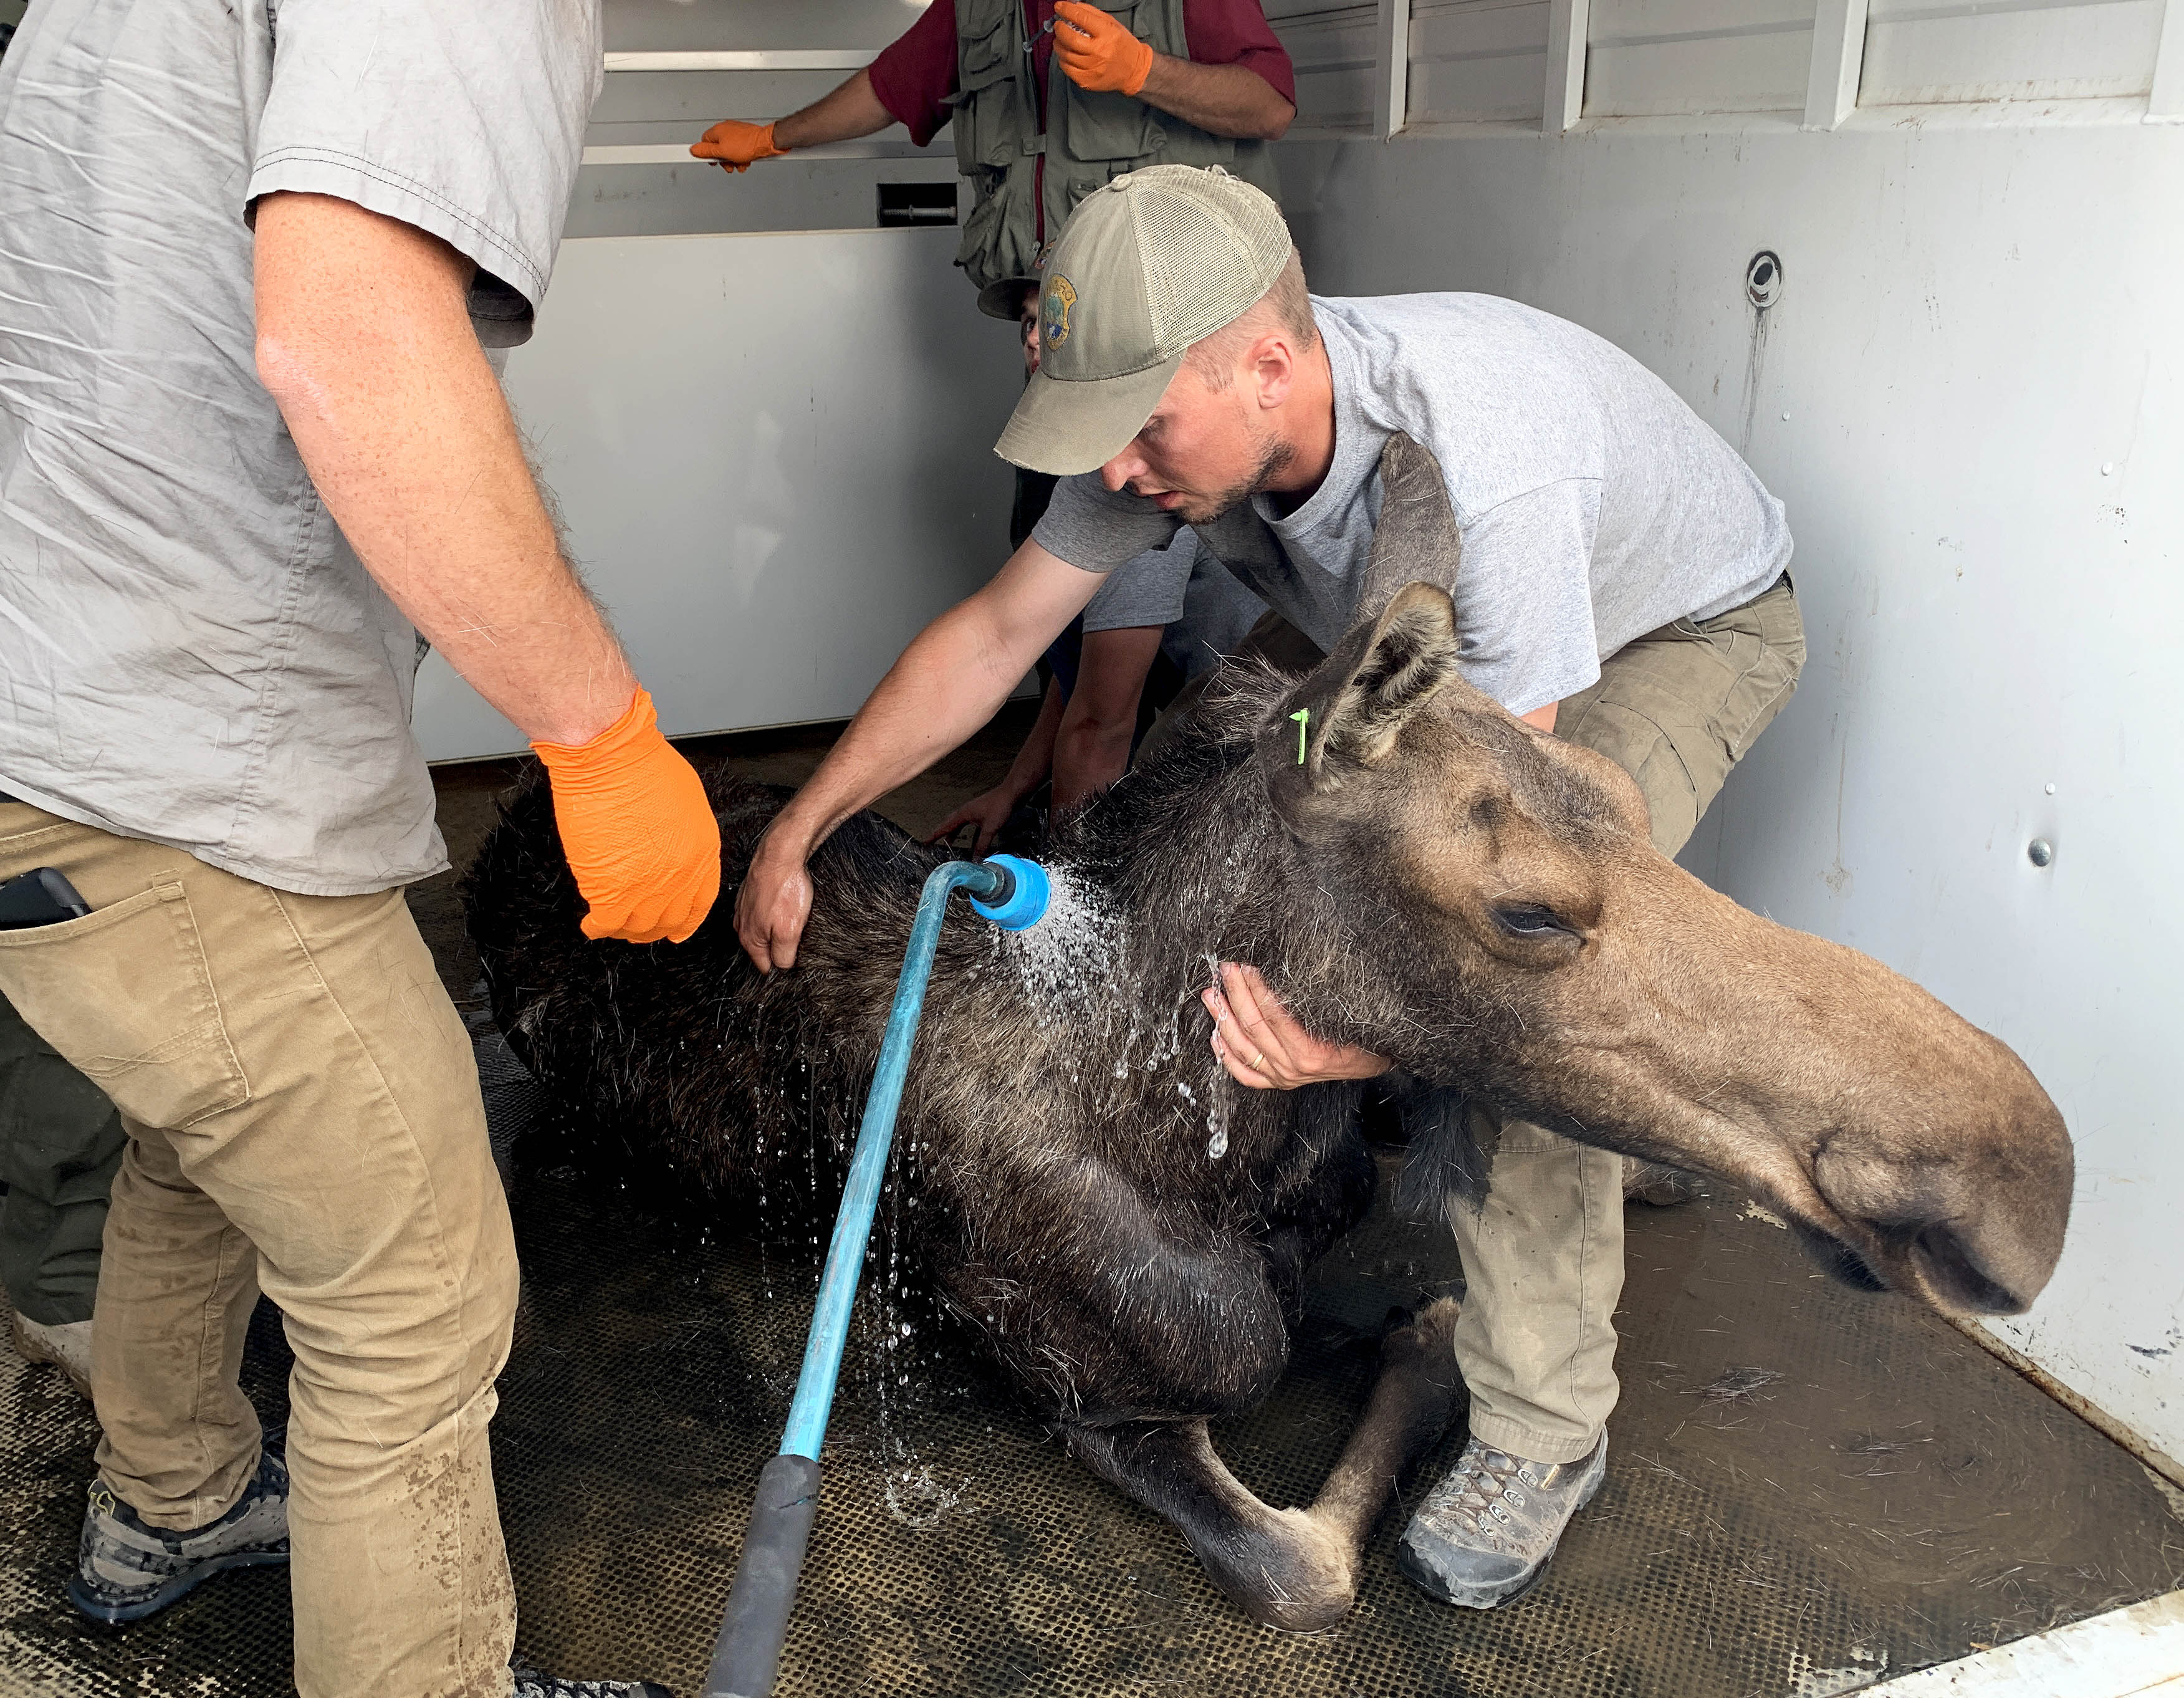 Fish and Game staff get a moose ready to be relocated out of town